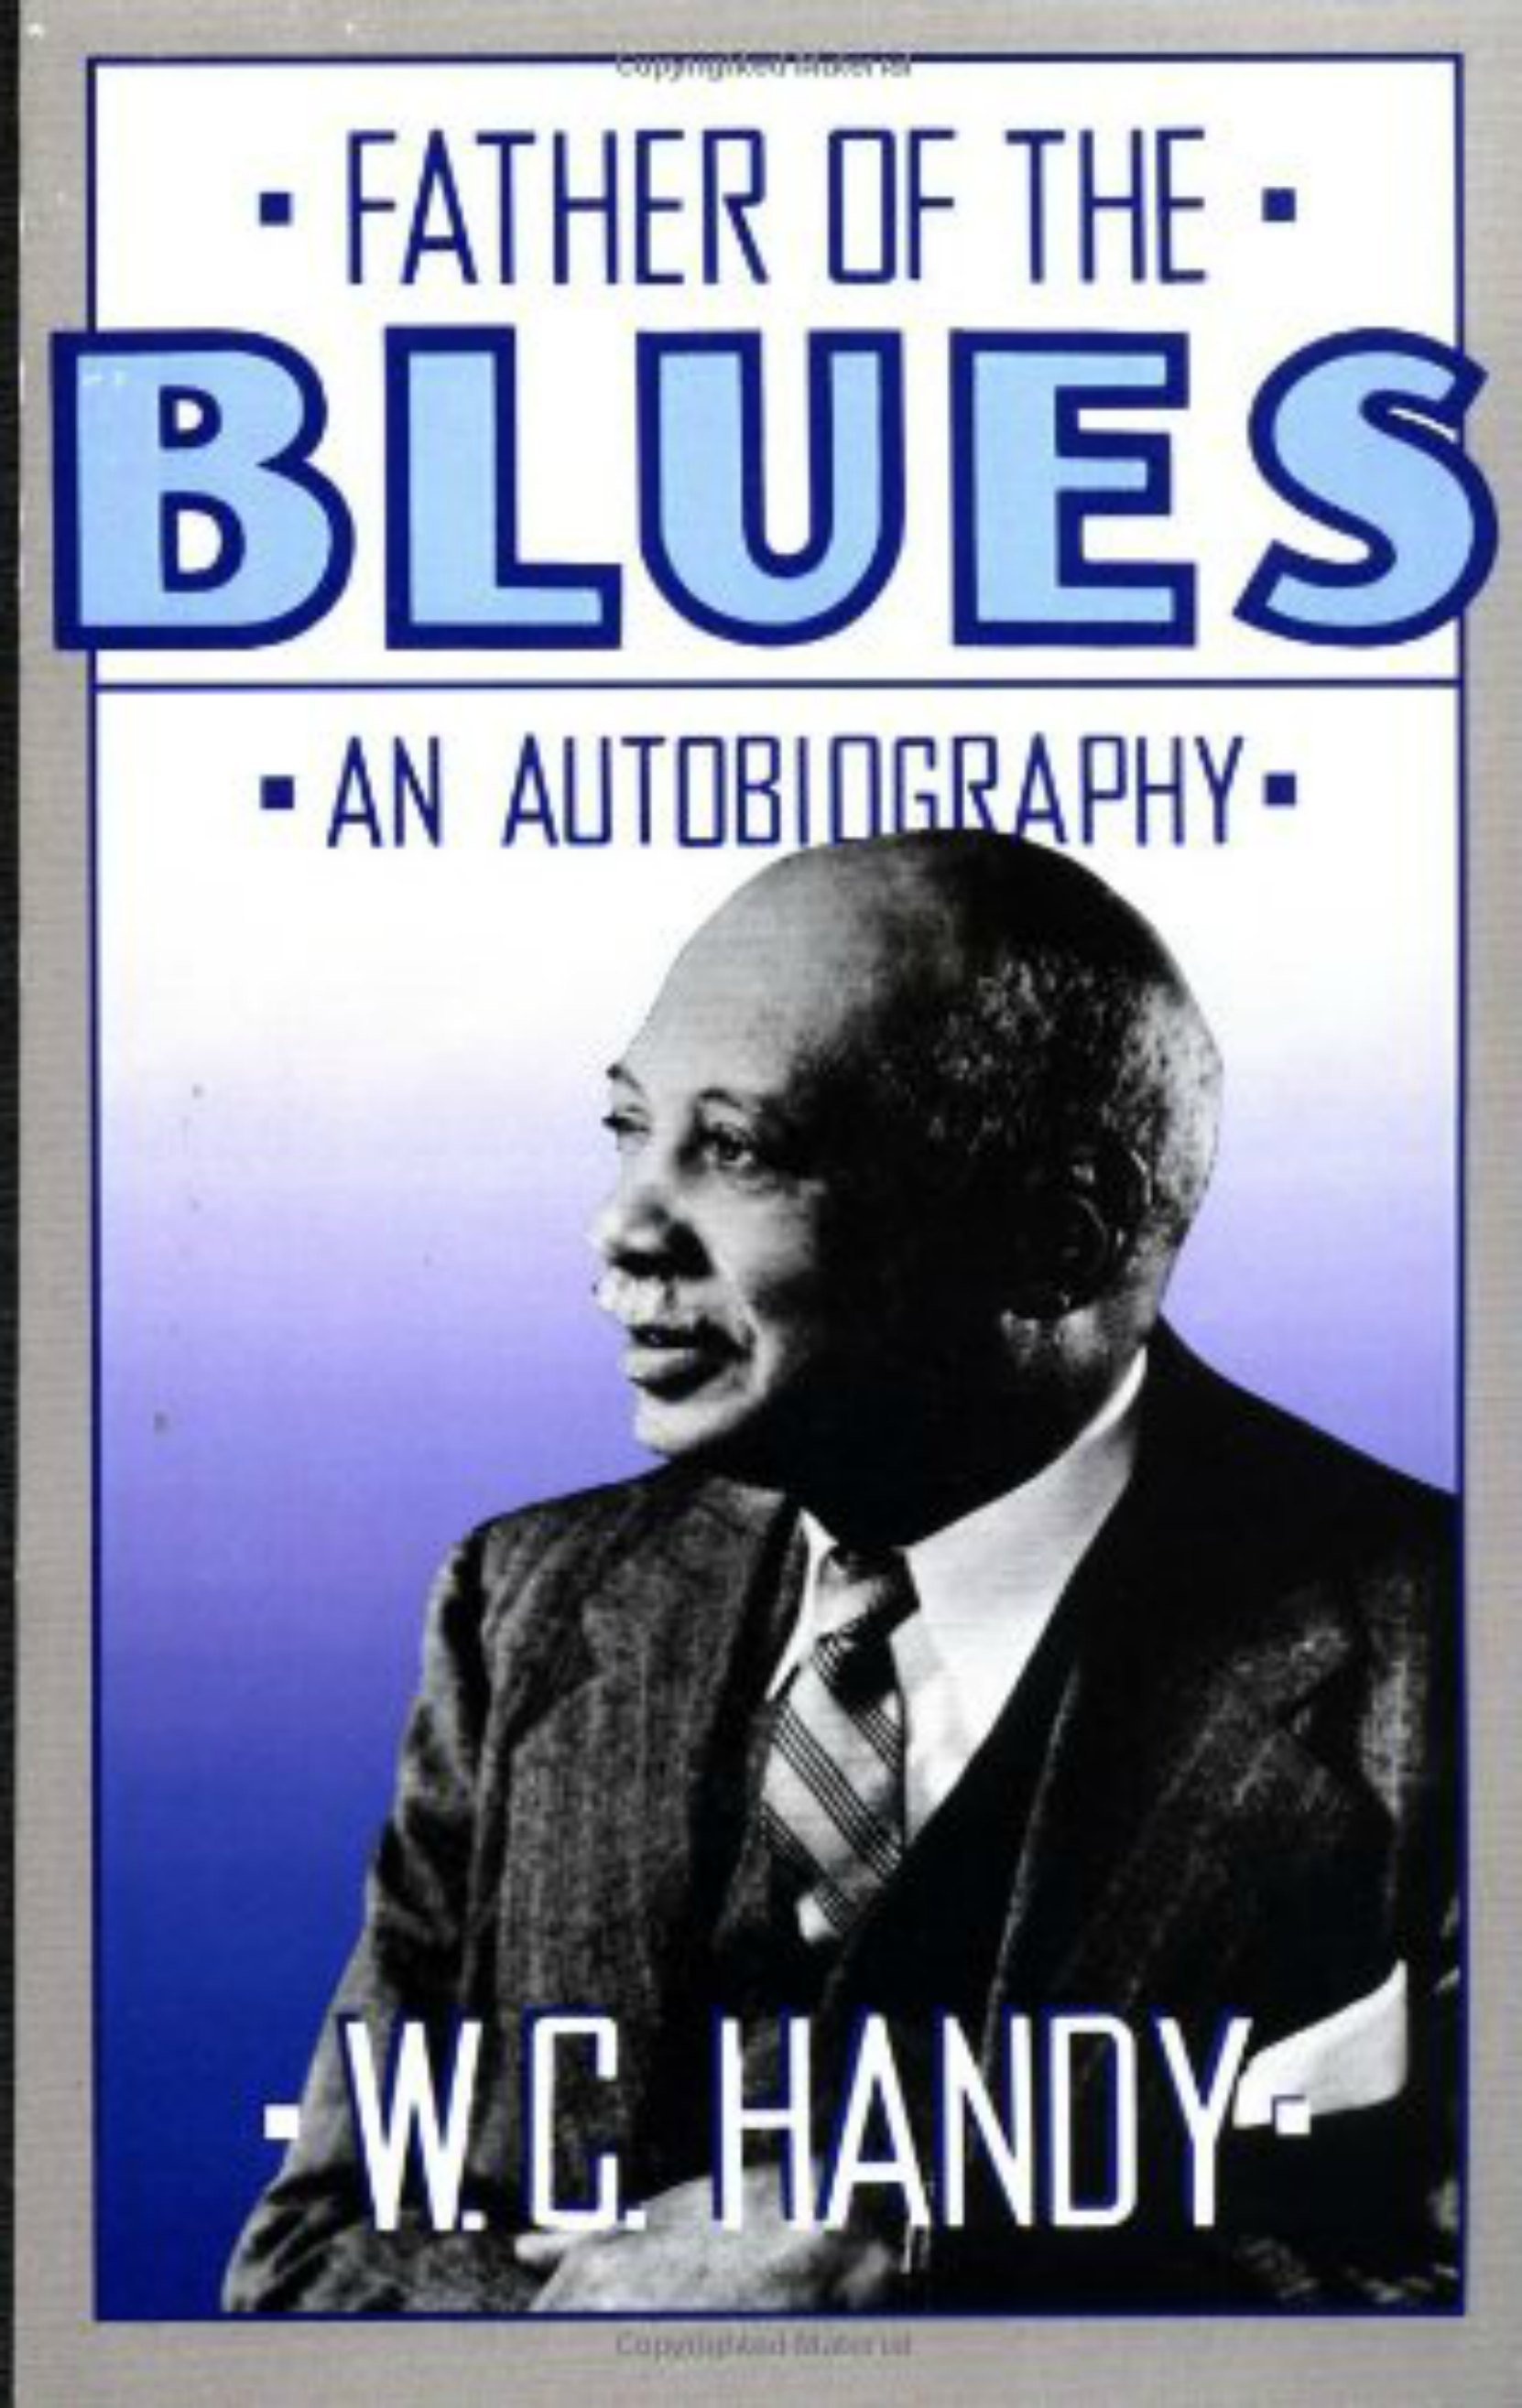 Cover of W.C. Handy's autobiography, Father of the Blues, paperback edition